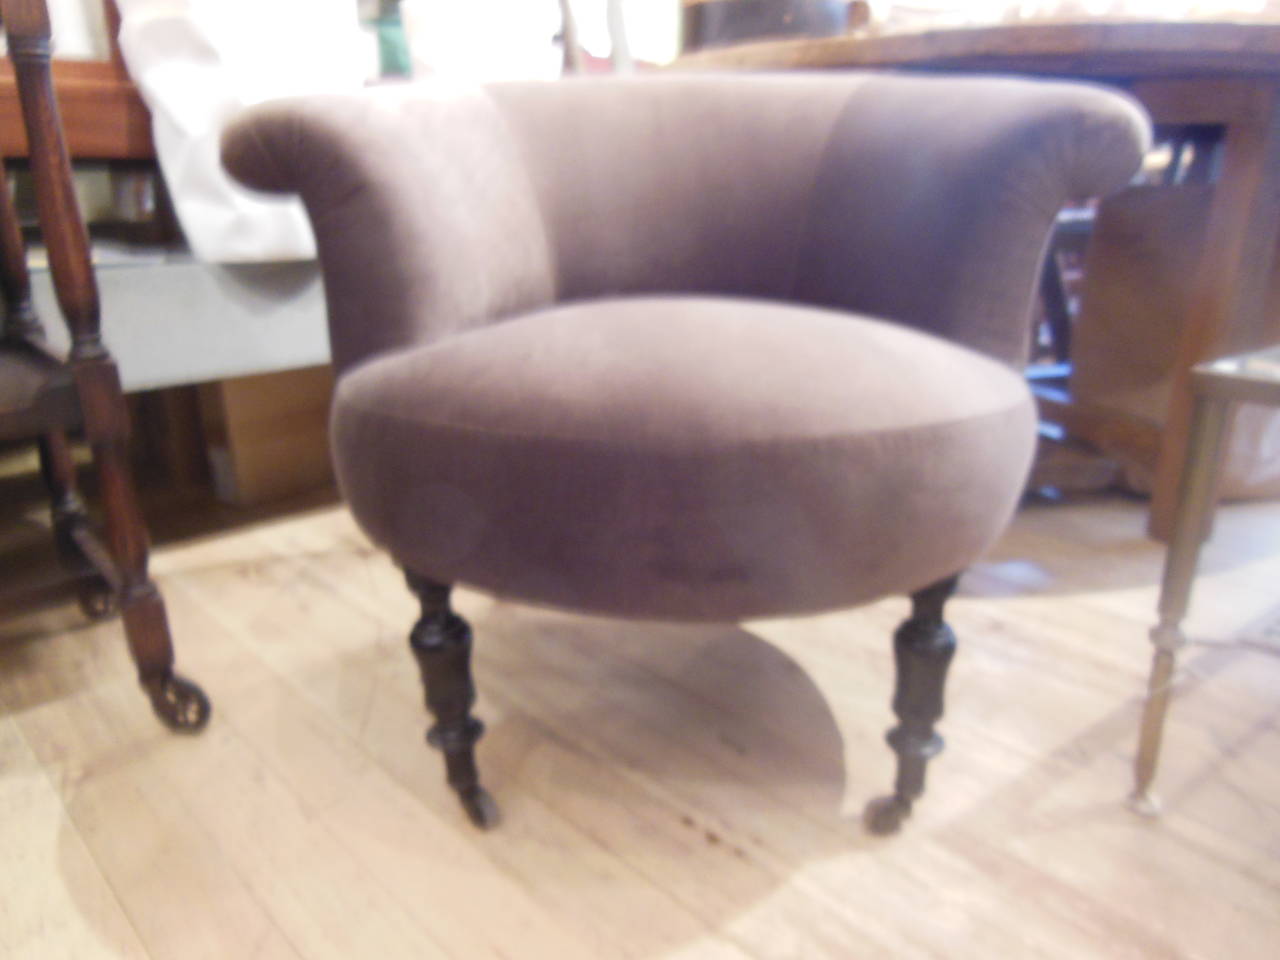 a beautiful vintage chair newly redone in velvet